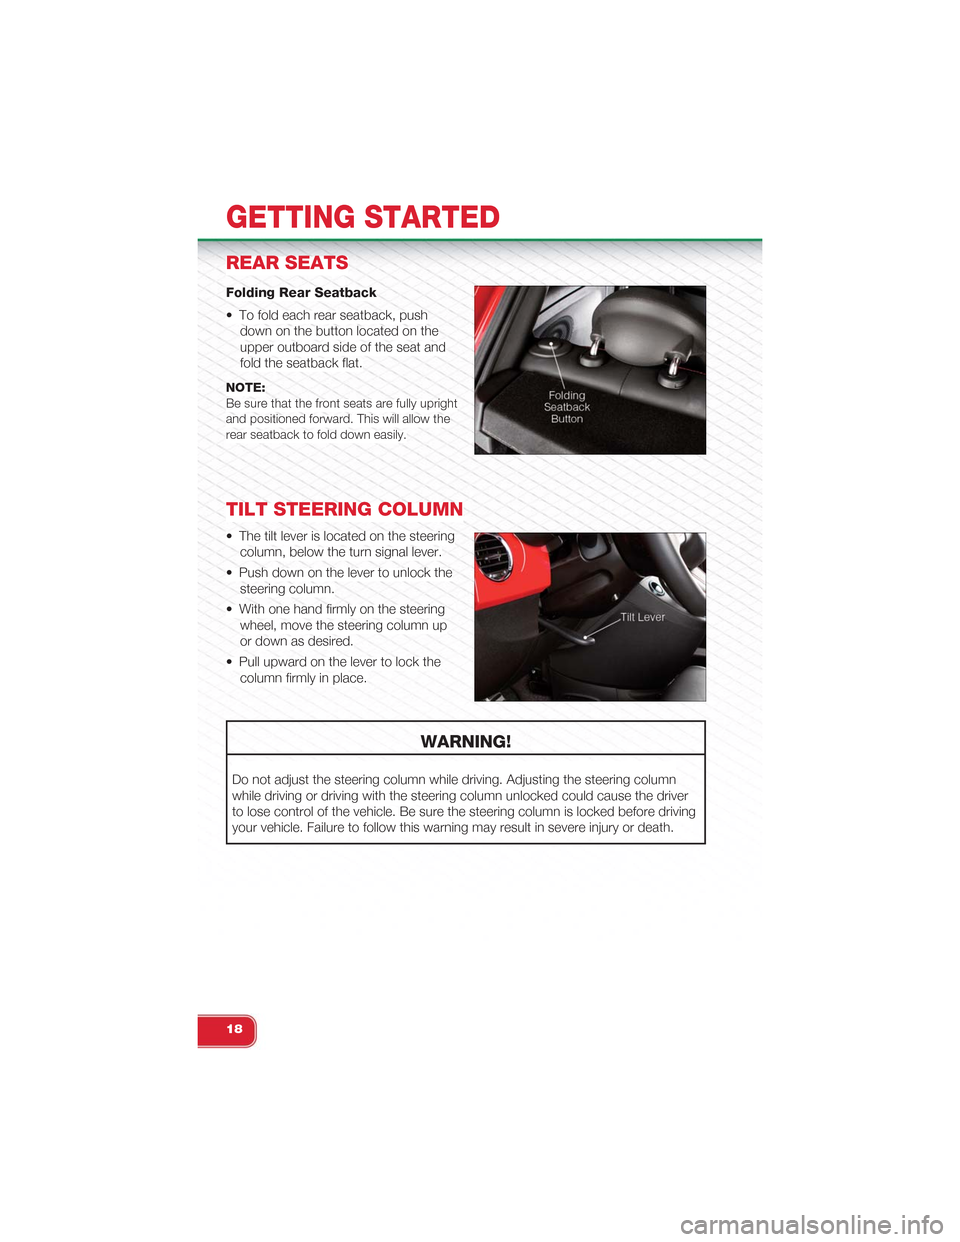 FIAT 500 ABARTH 2014 2.G User Guide REAR SEATS
Folding Rear Seatback
• To fold each rear seatback, push
down on the button located on the
upper outboard side of the seat and
fold the seatback flat.
NOTE:Be sure that the front seats ar